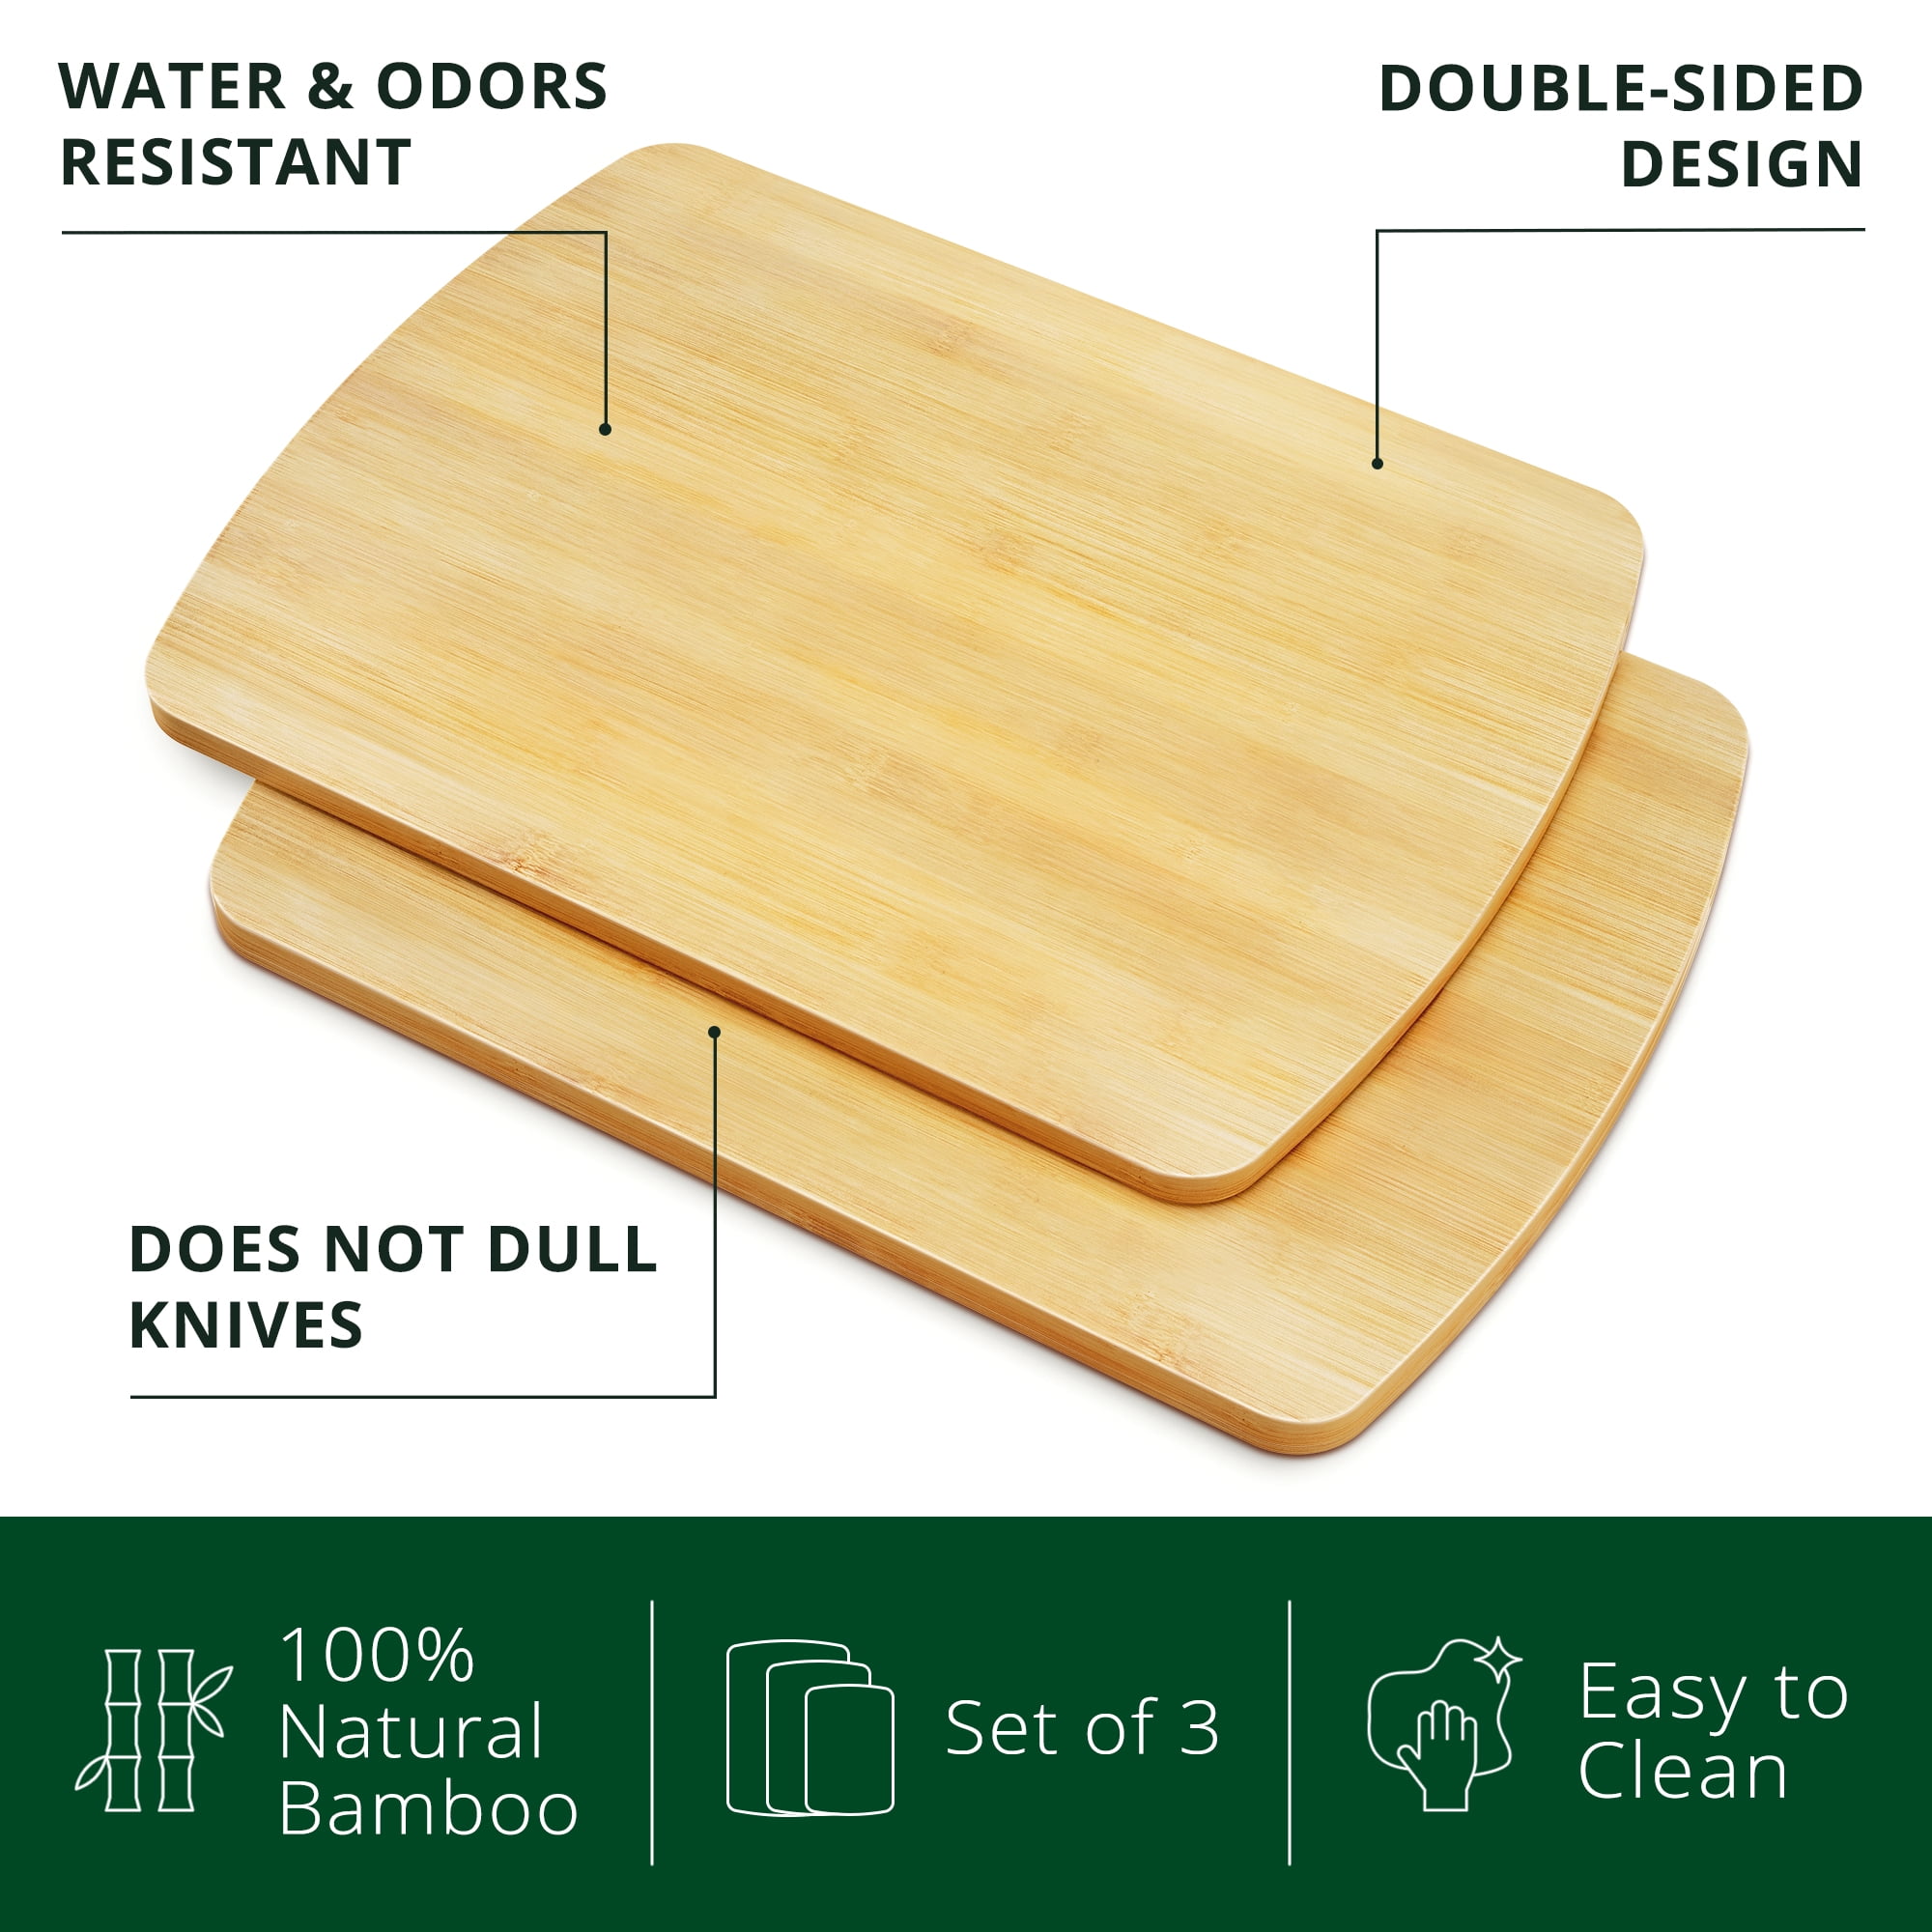 Royal Craft Wood Bamboo Cutting Board with State Artwork 